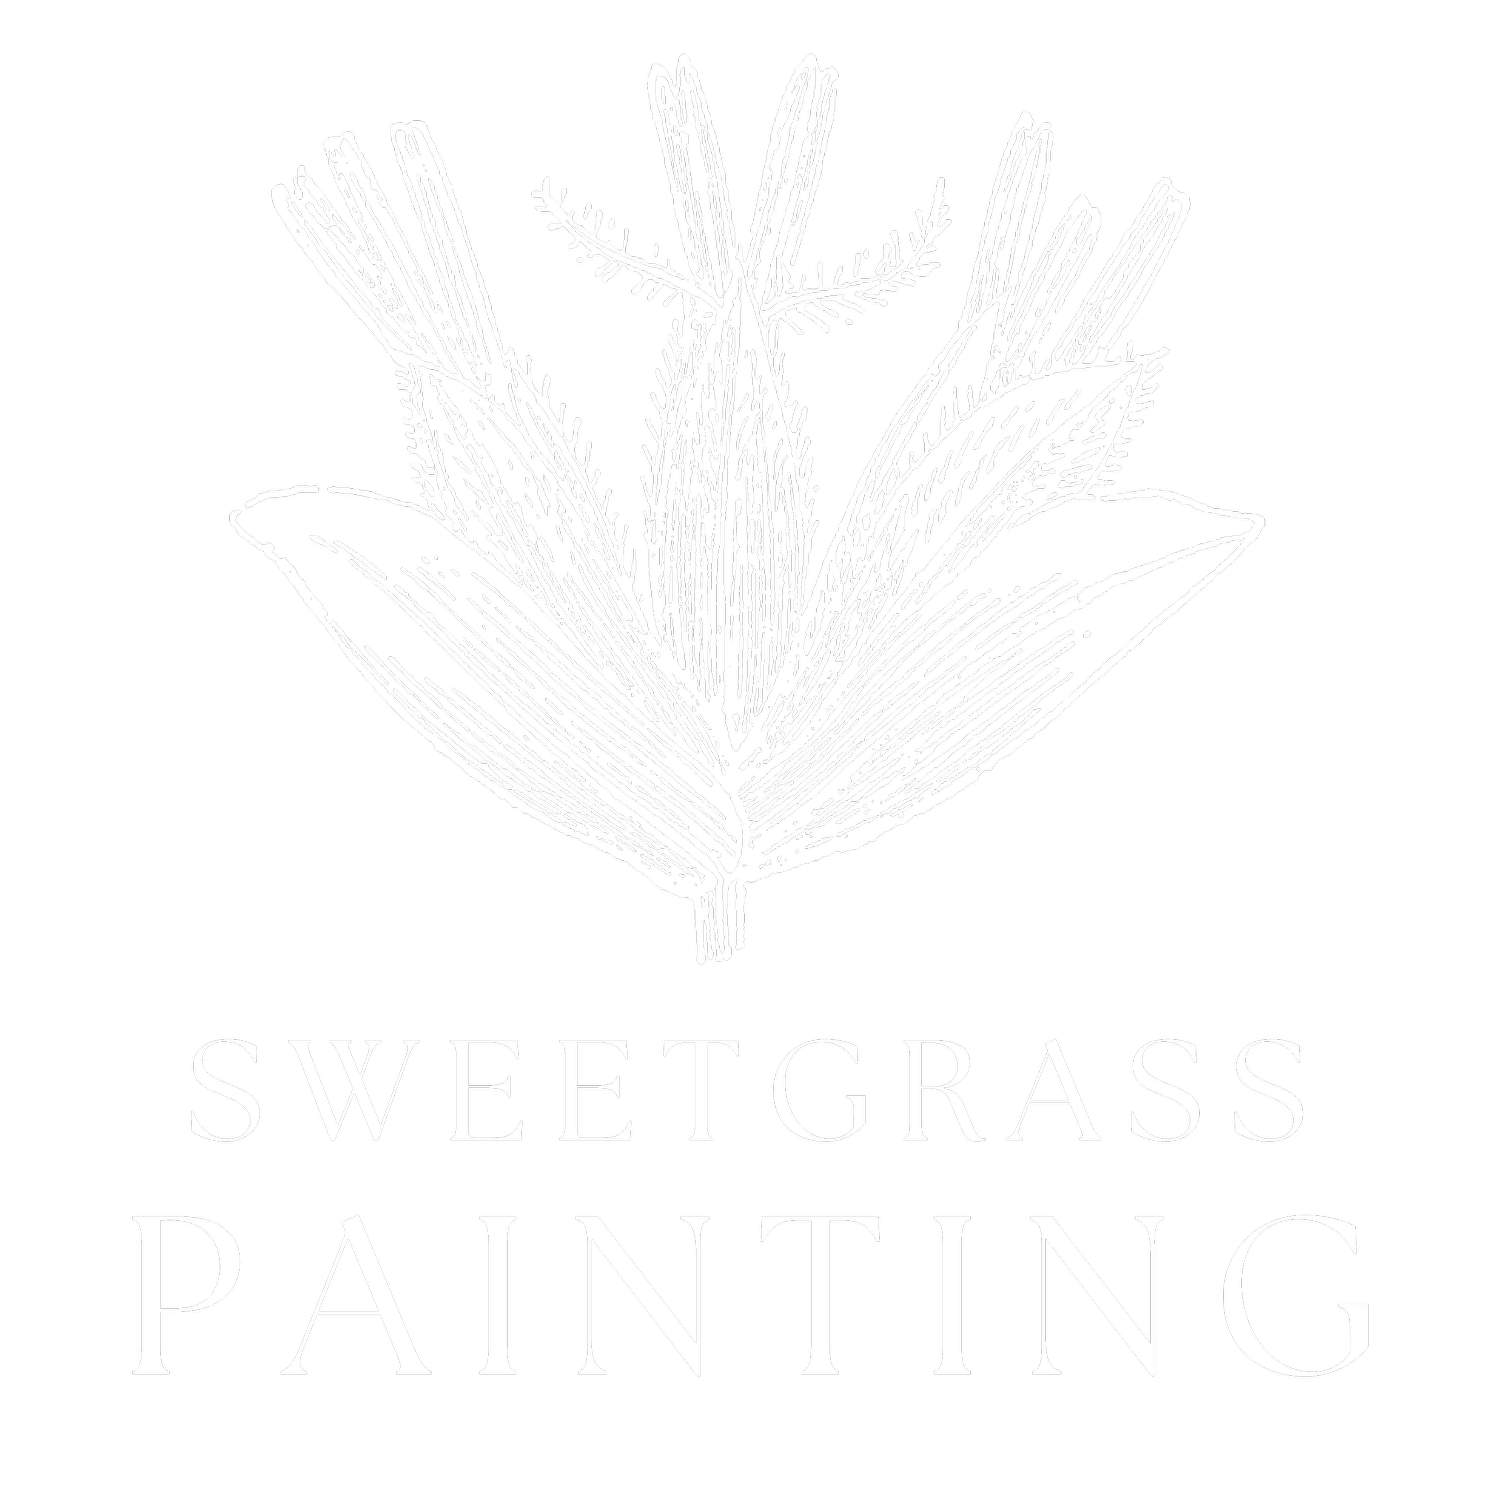 Sweetgrass Painting